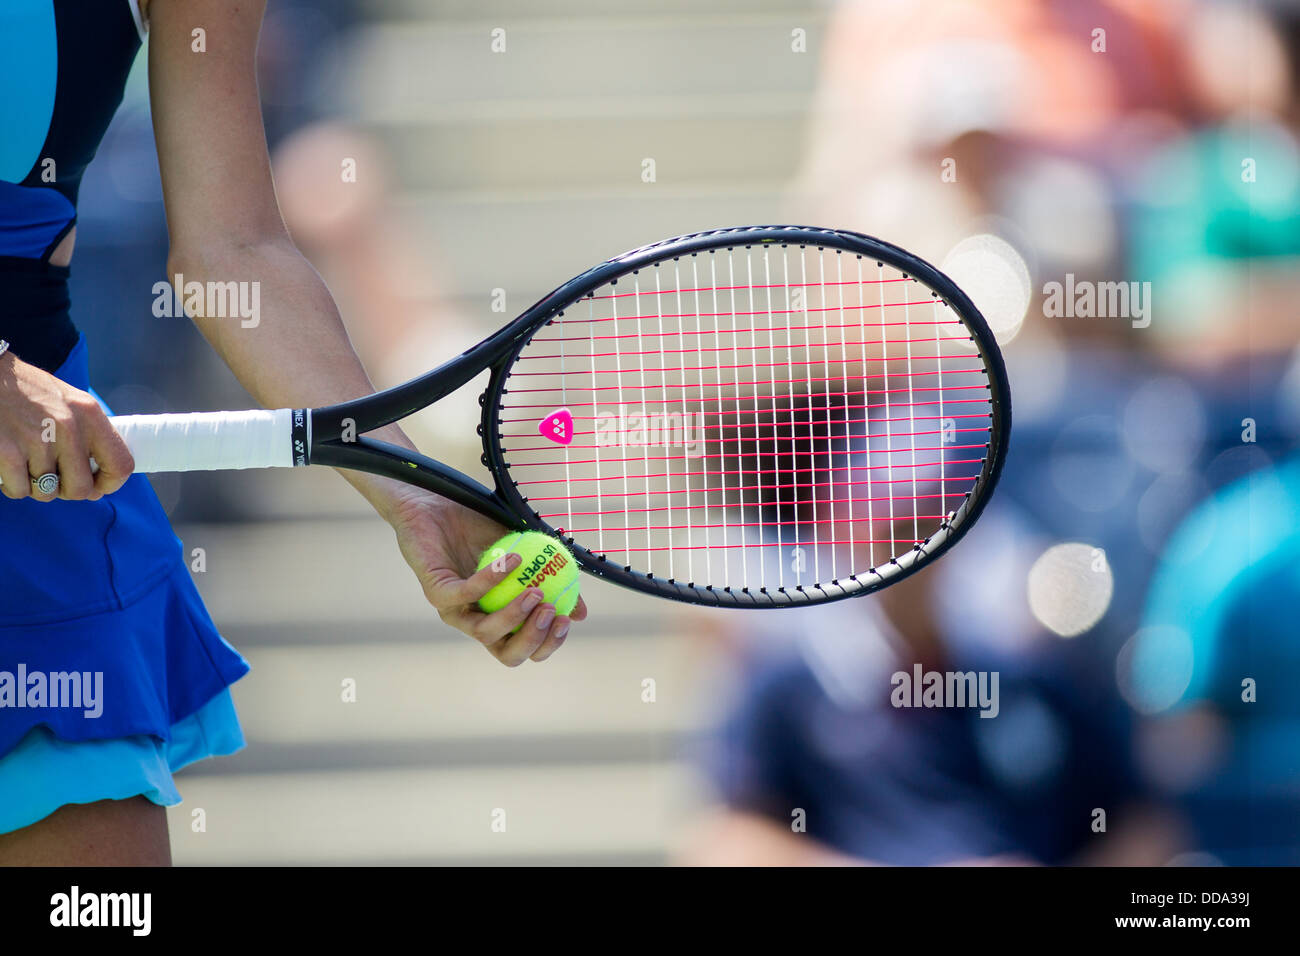 Detail of tennis player holding the racquet and ball about to serve. Stock Photo